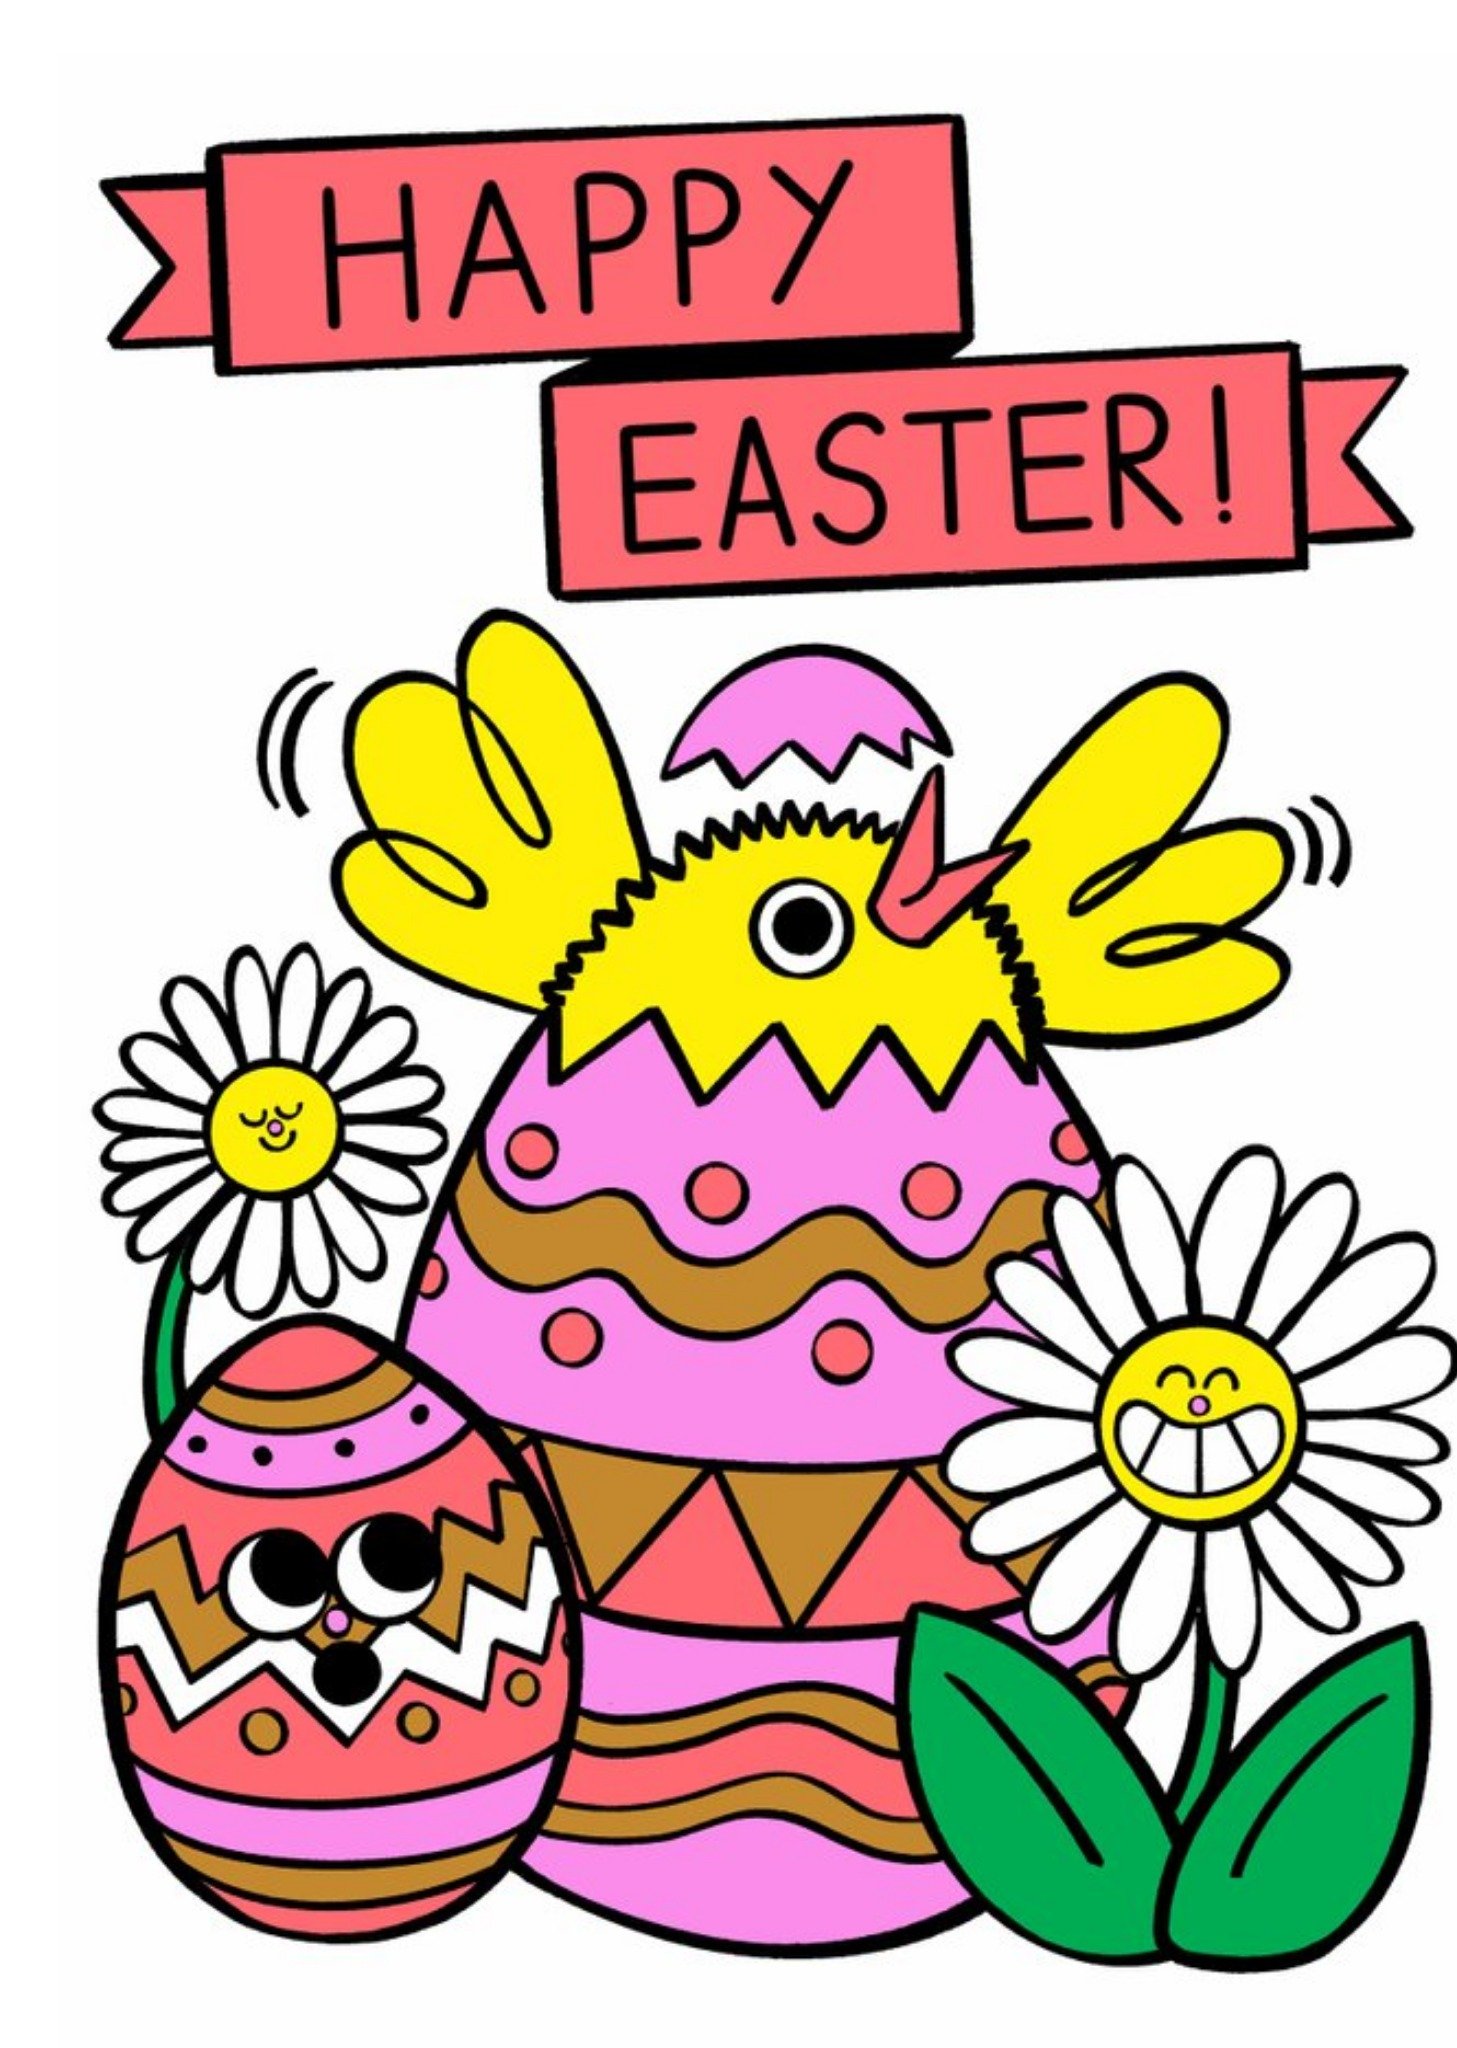 Moonpig Jacky Sheridan Colourful Chick In An Egg Easter Card Ecard